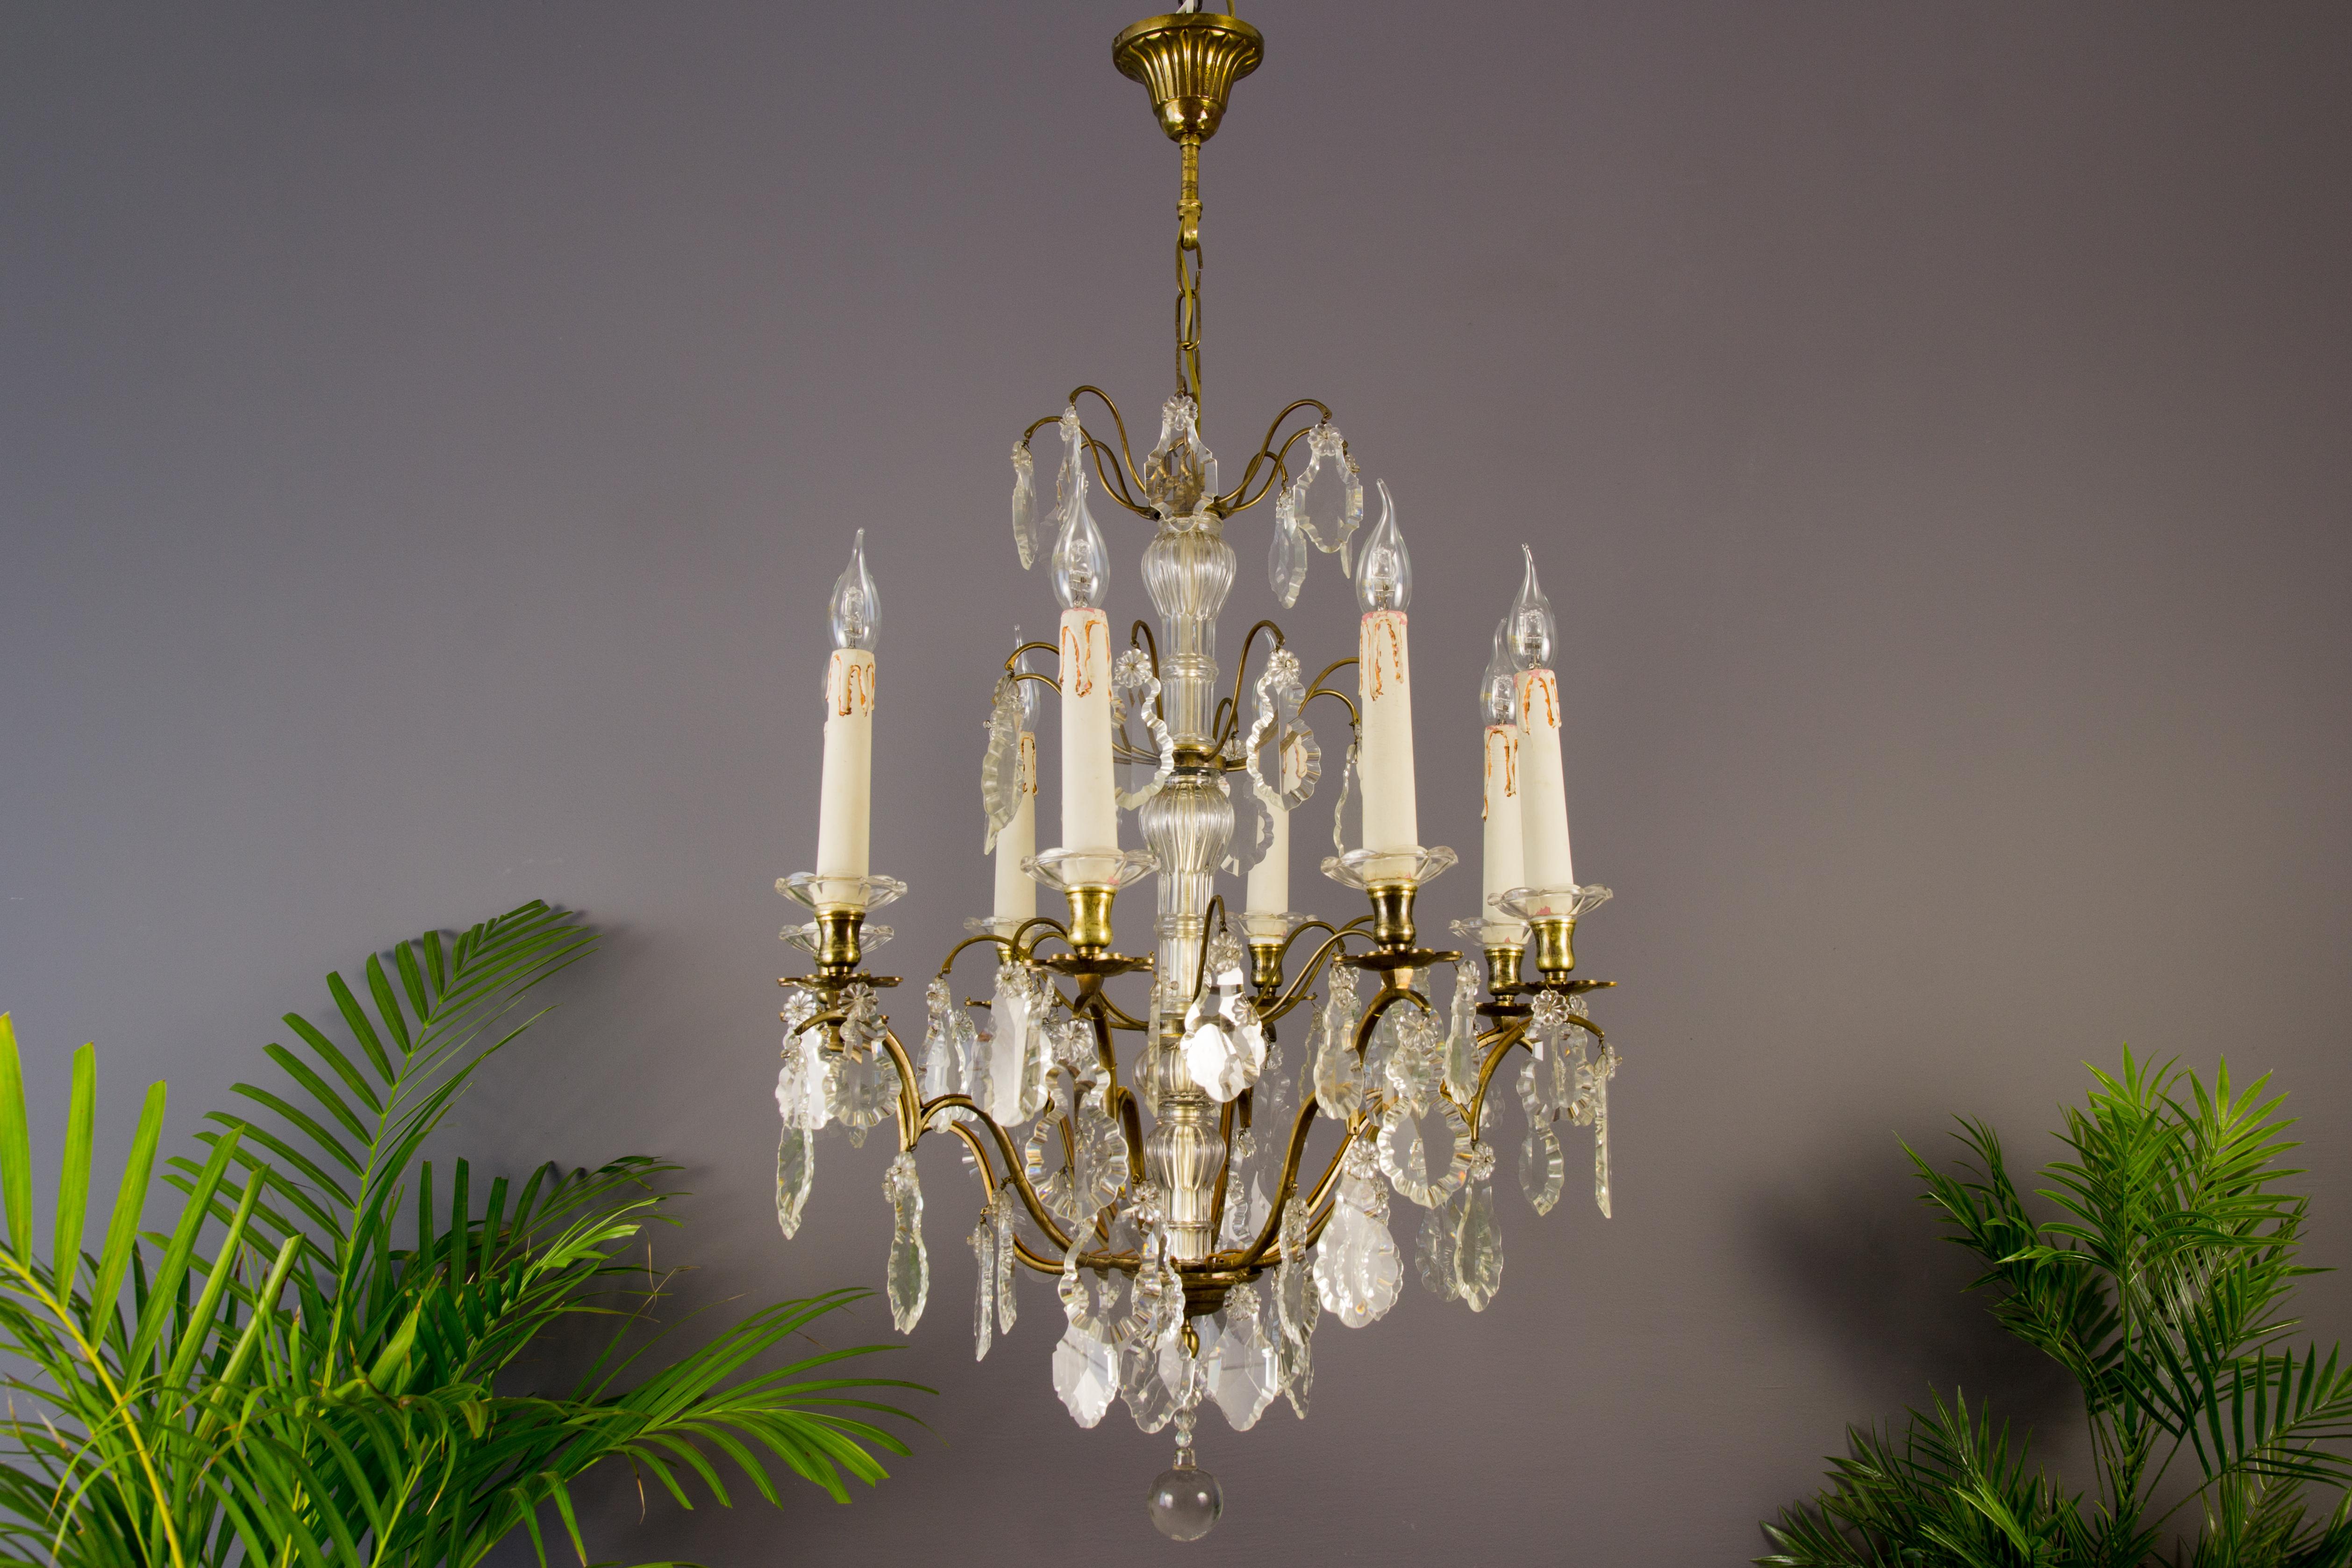 A stunning crystal and a brass chandelier made in France in circa 1890s. Originally crafted for 8 candles, this antique chandelier has been electrified. Eight brass arms with flower-shaped brass and crystal bobeches, each with a socket for an E 14